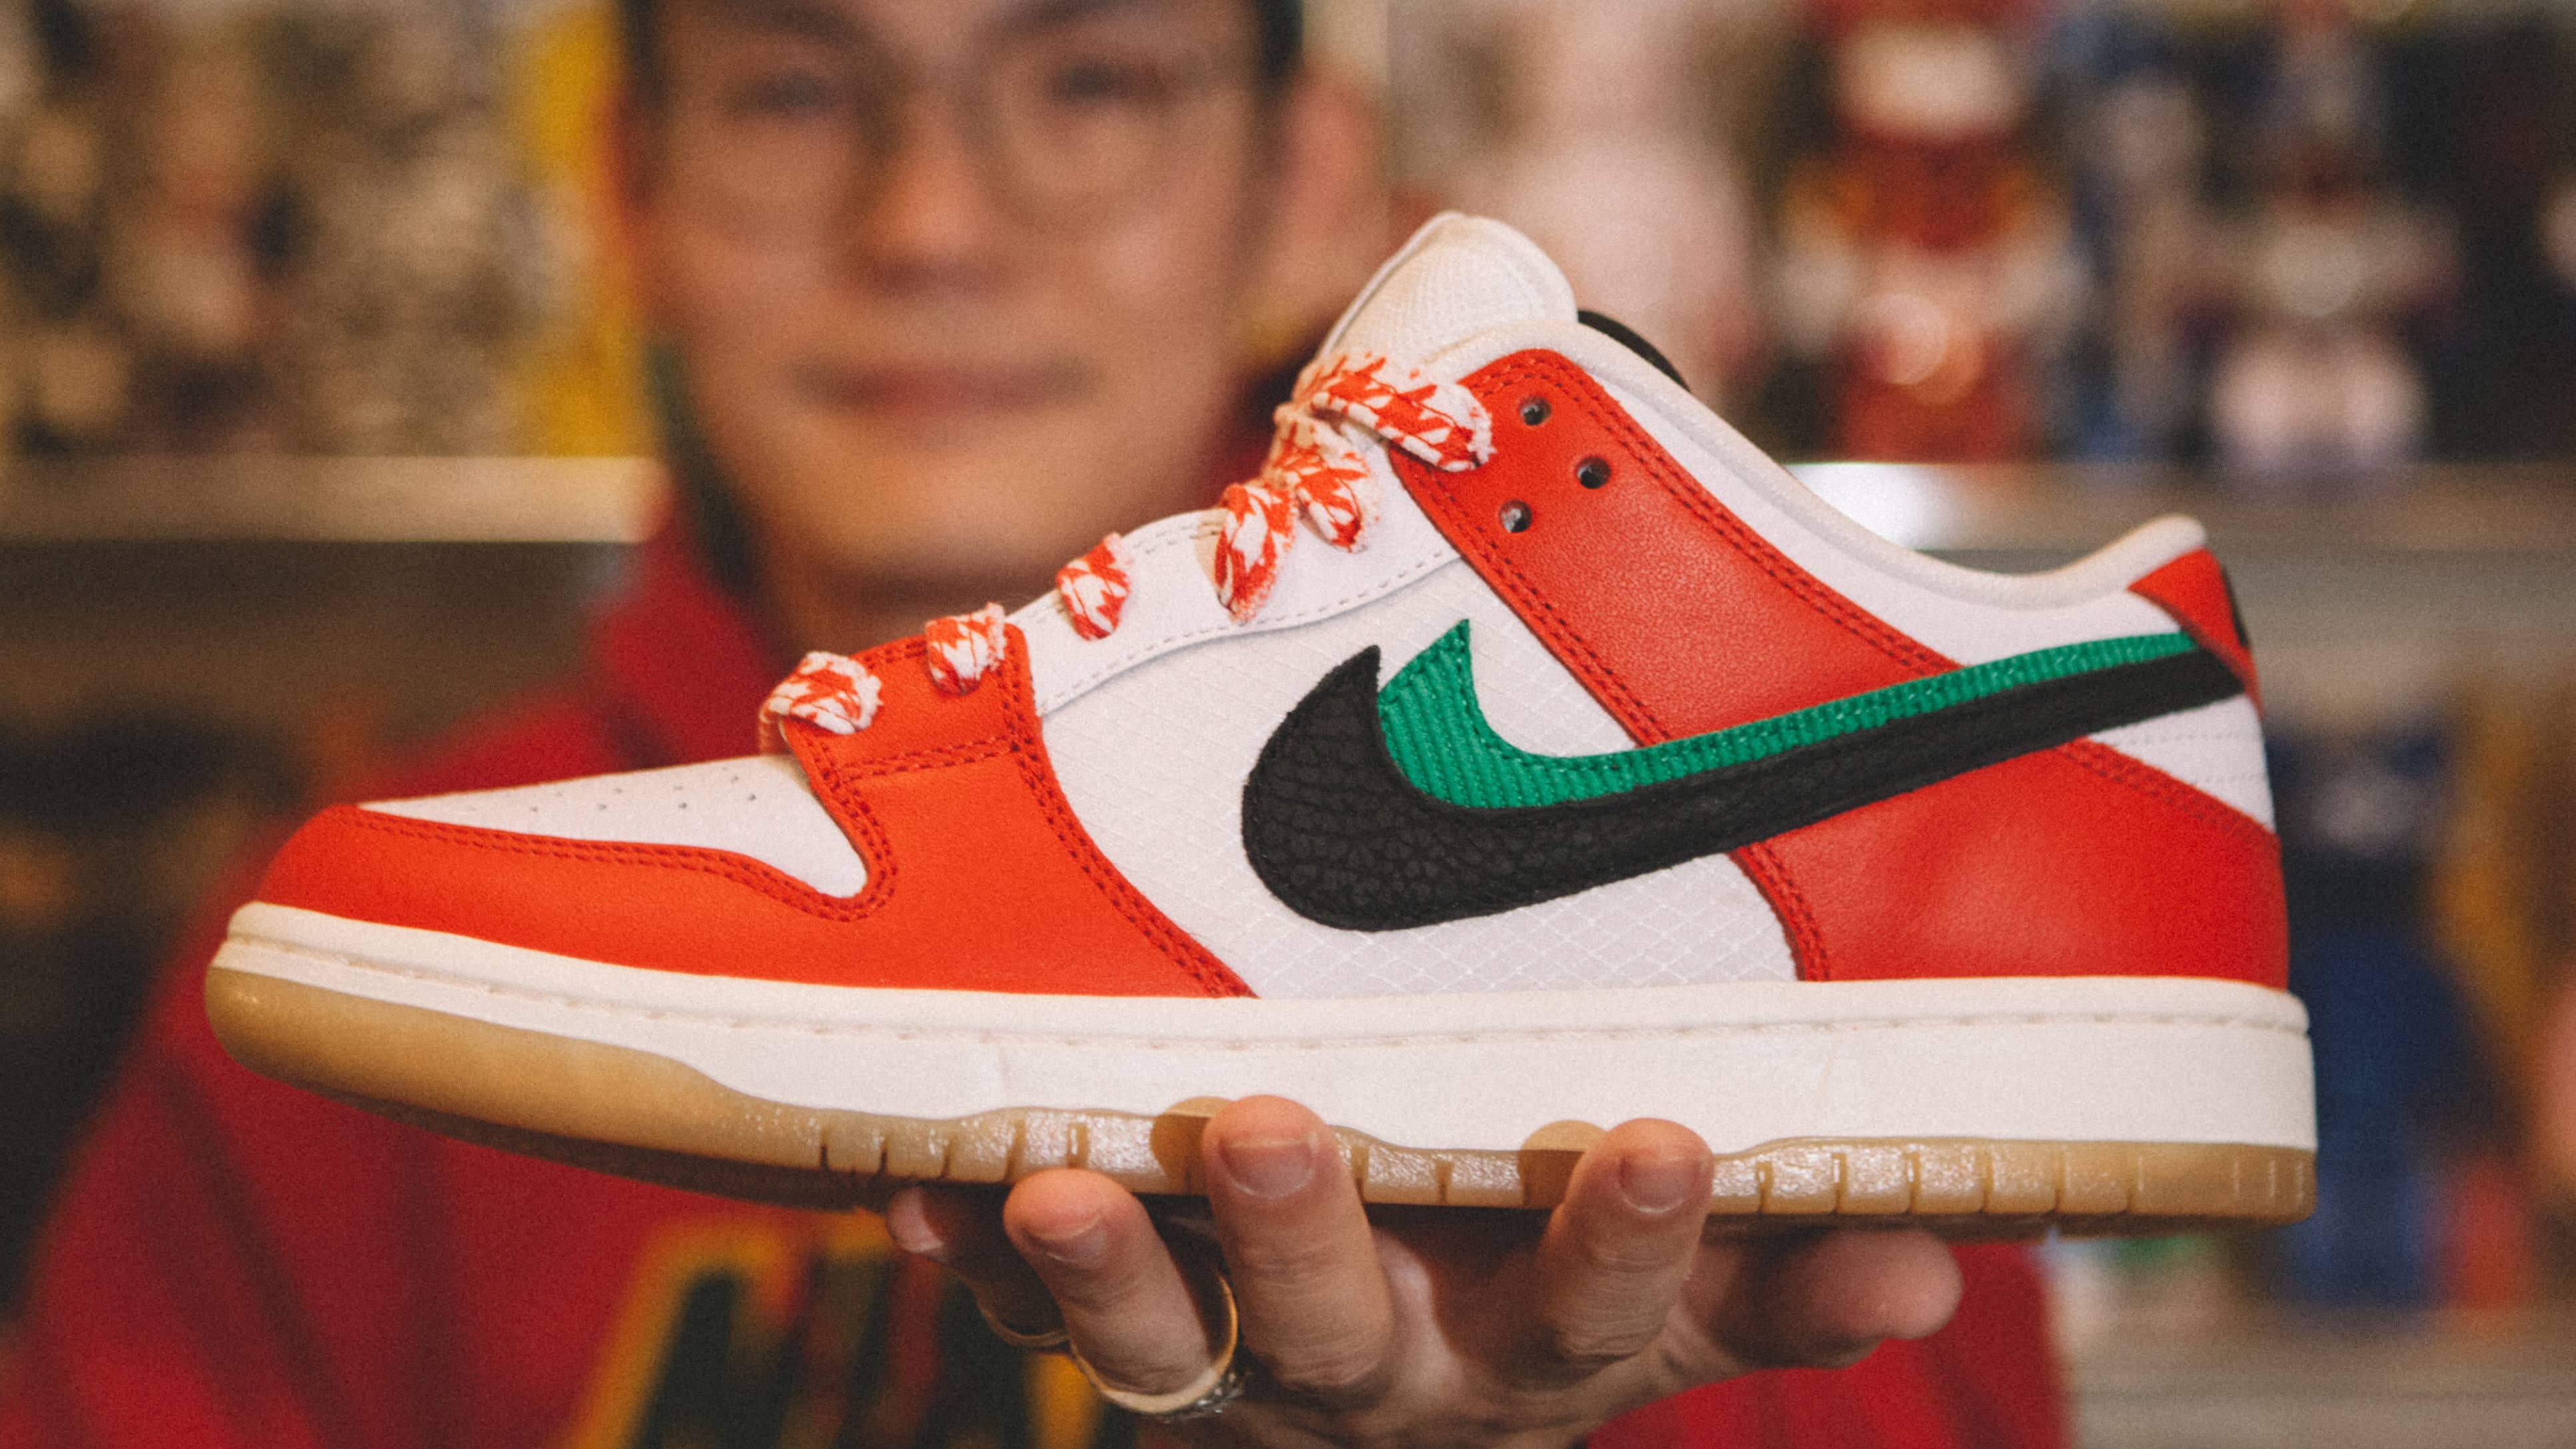 Frame's 'Habibi' Nike SB Dunk Is Here. Where Did It Come From?